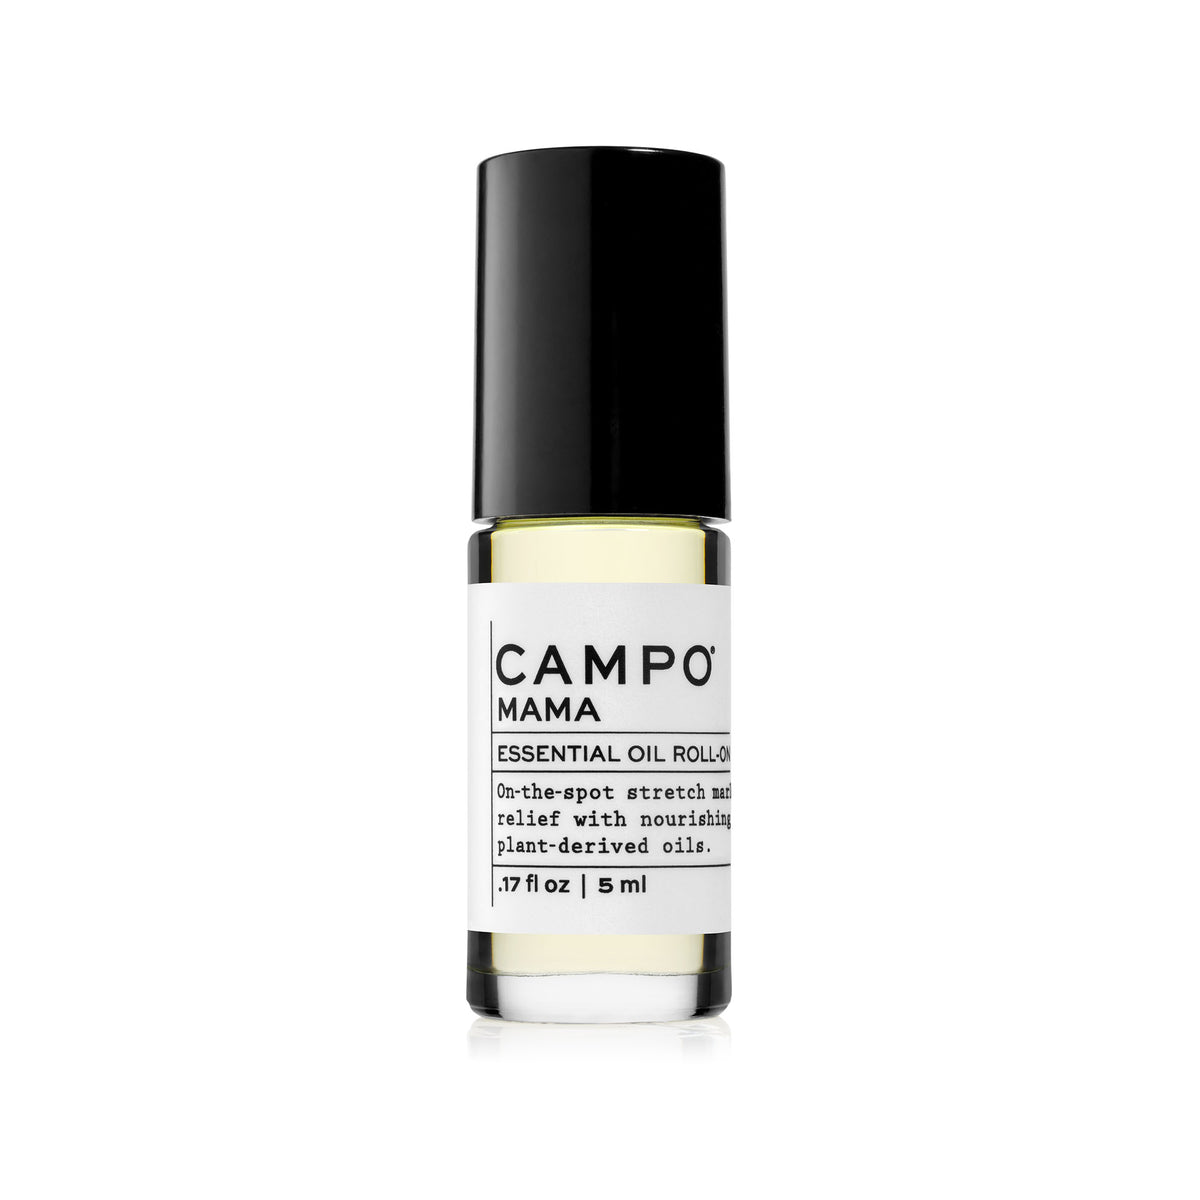 Campo Beauty Essential Oil MAMA Stretch Mark Relief Blend Roll-On that in 5 ml. On-the-spot relief of stretched skin with 100% natural nourishing plant-derived oils and pure essential oils of grapefruit, neroli orange blossom, and bergamot. Help prevent stretch marks and soothe the itch as you feel grounded and uplifted. It&#39;s pre-blended with 100% natural beauty carrier oils so it&#39;s ready to roll with you as you grow.